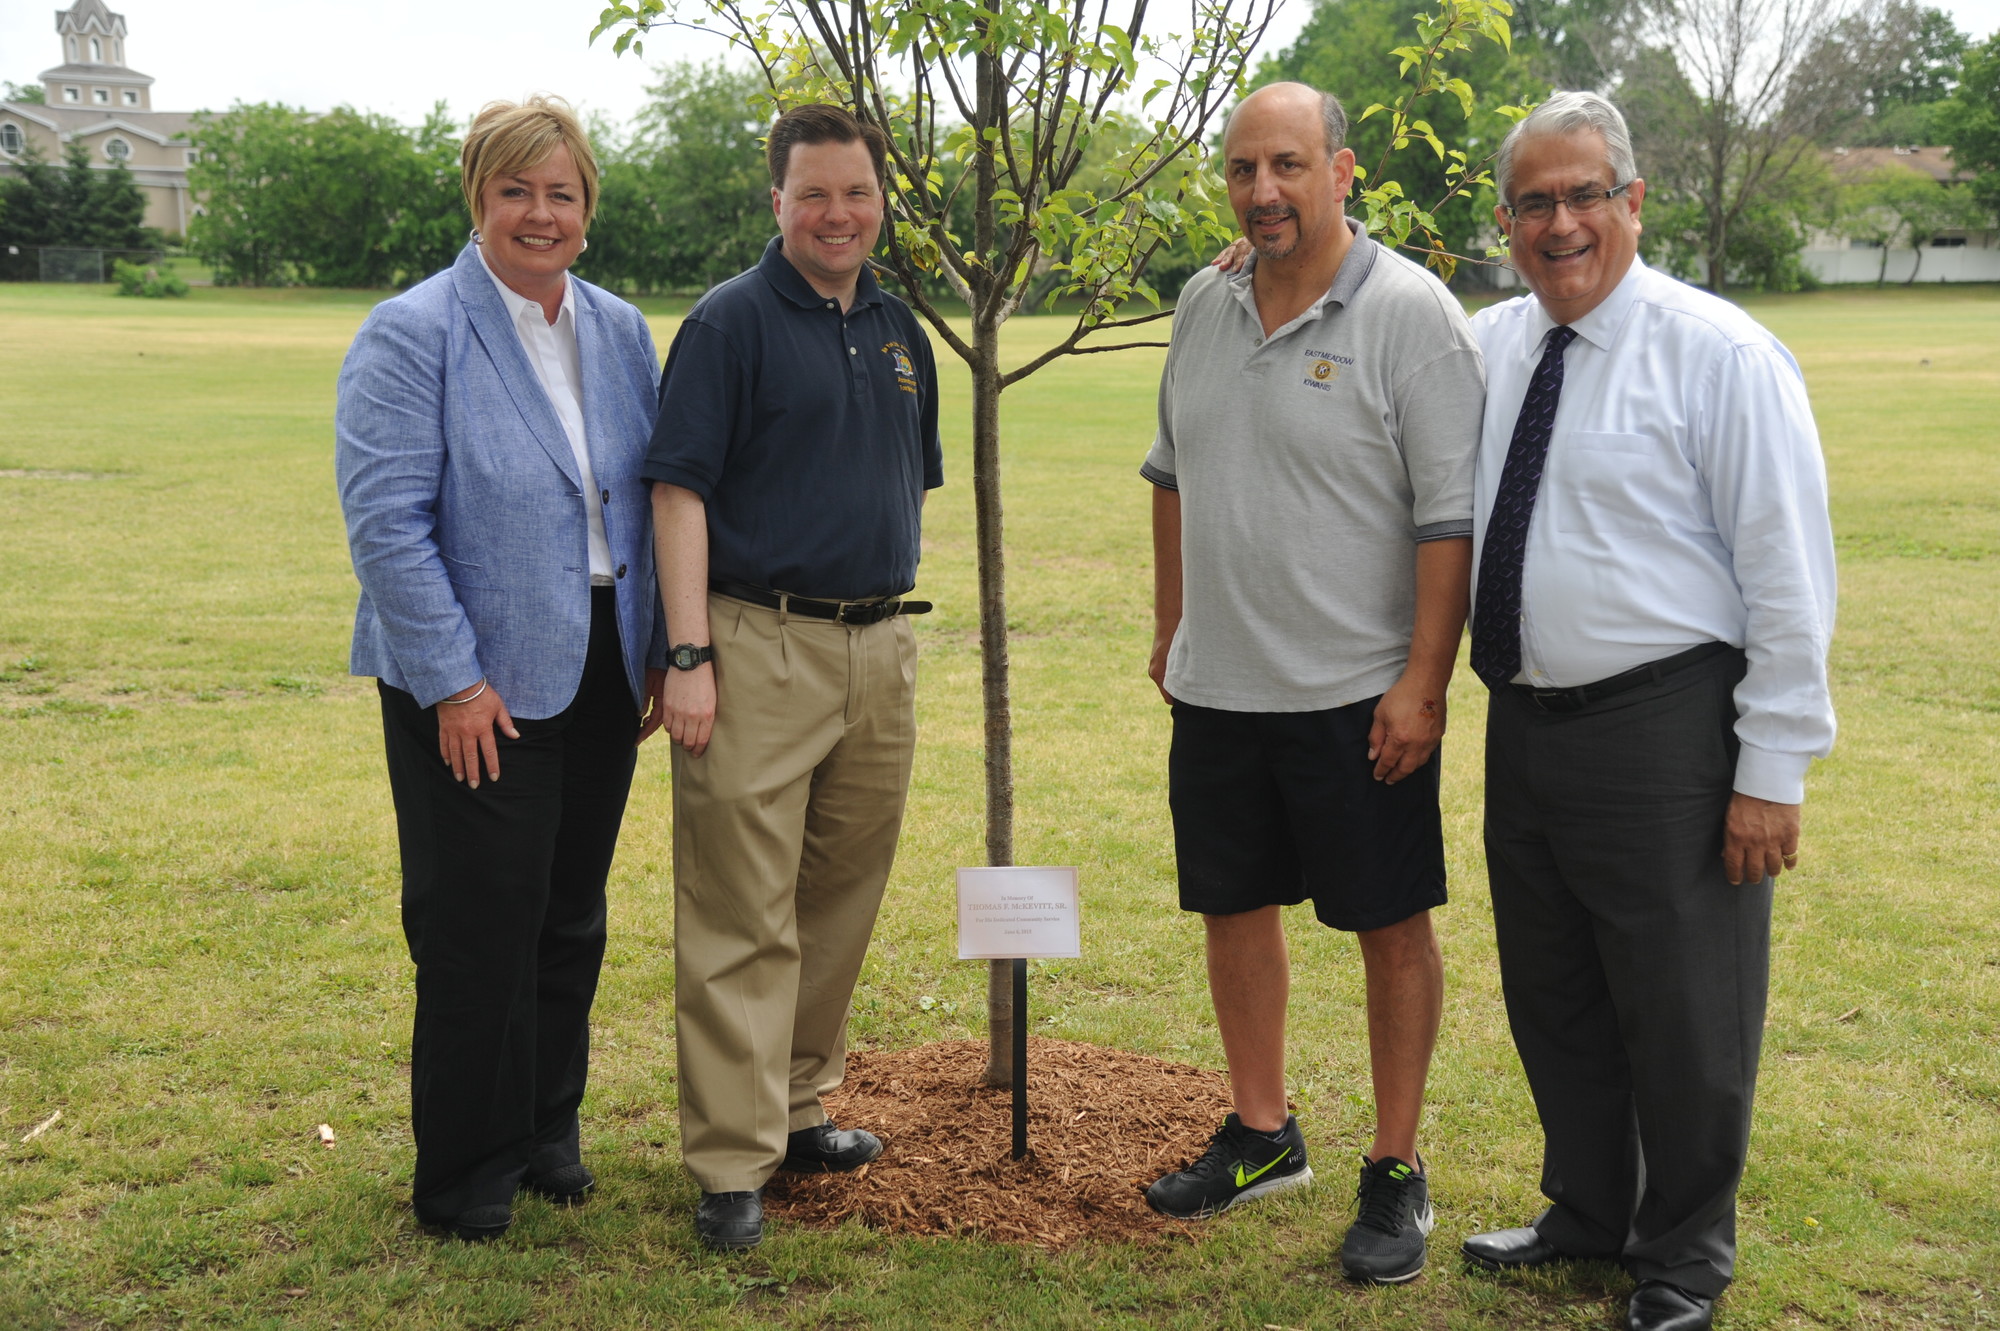 A tree was planted in honor of Thomas McKevitt, Sr., a longtime community activist who died last June. Standing near the memorial was his son, State Assemblyman Tom McKevitt, second from left, Pride Day co-chairman Alan Beinhacker, second from right, and Town of Hempstead Supervisor Kate Murray and Councilman Anthony Santino.